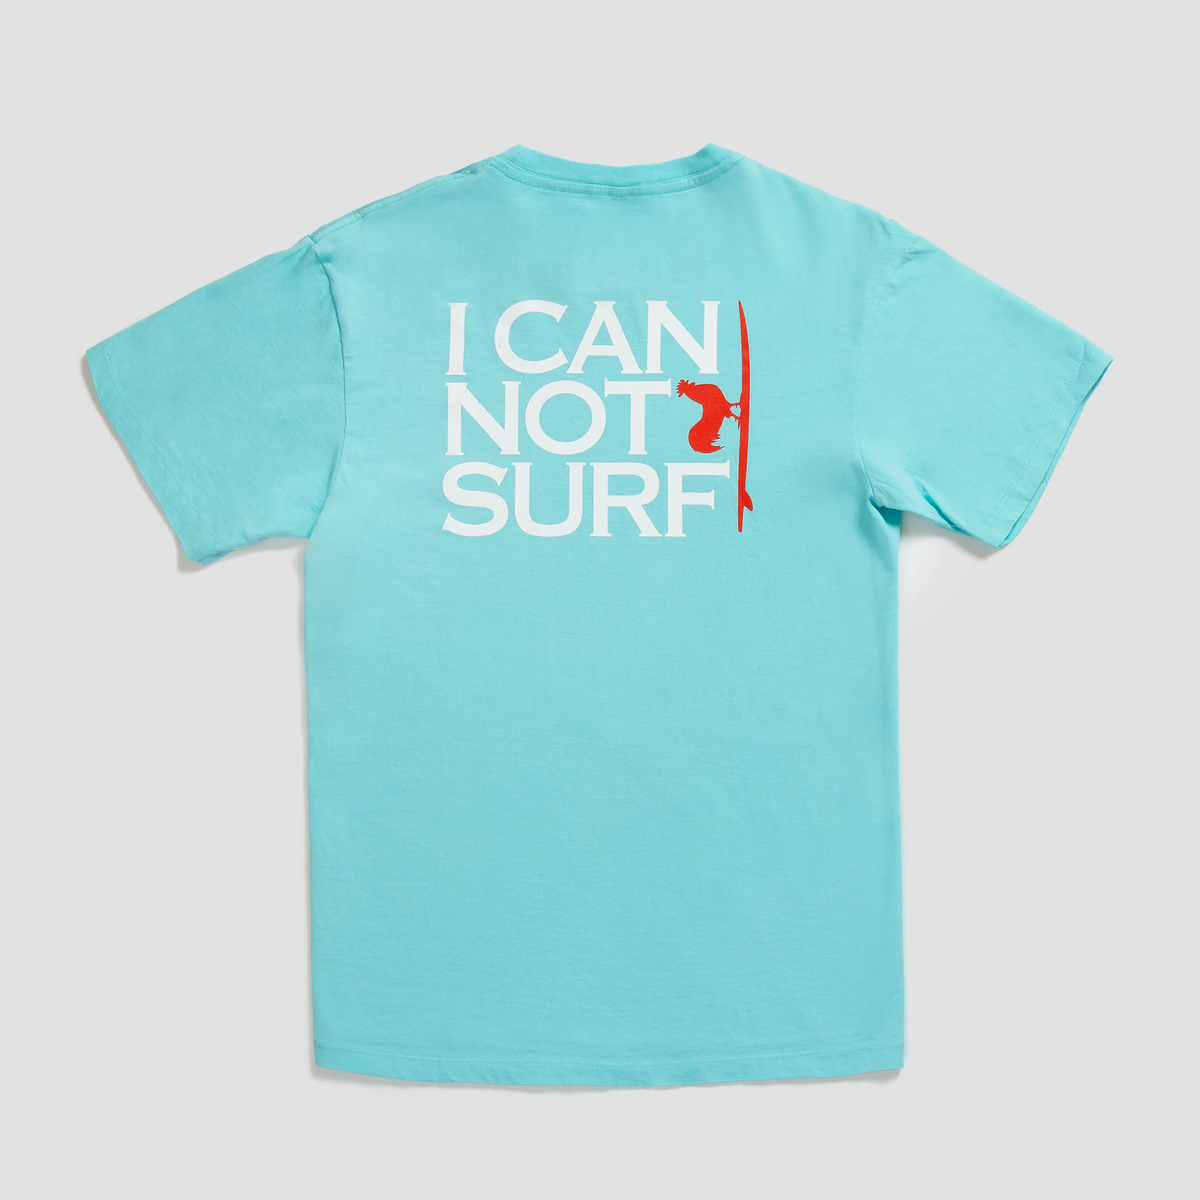 Sale - I Can Not Surf Tee